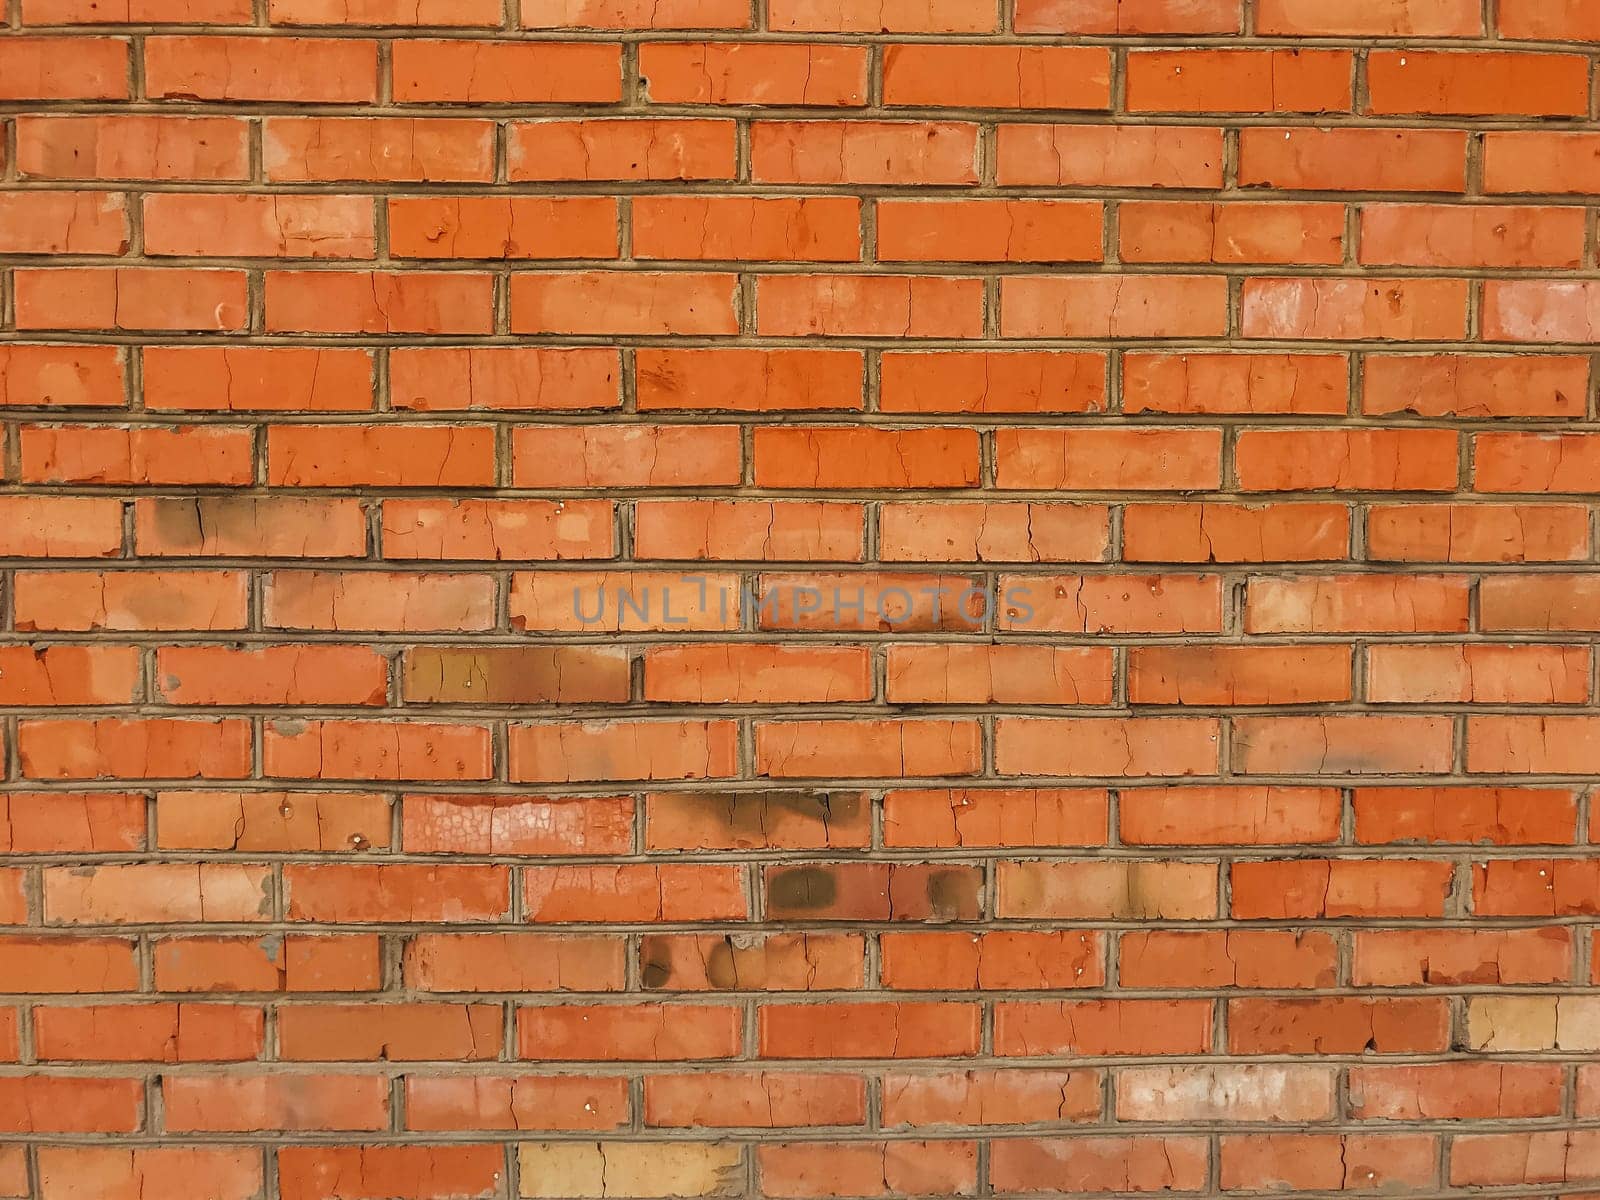 A brick wall with a red color. The wall is made of bricks and has a rough texture